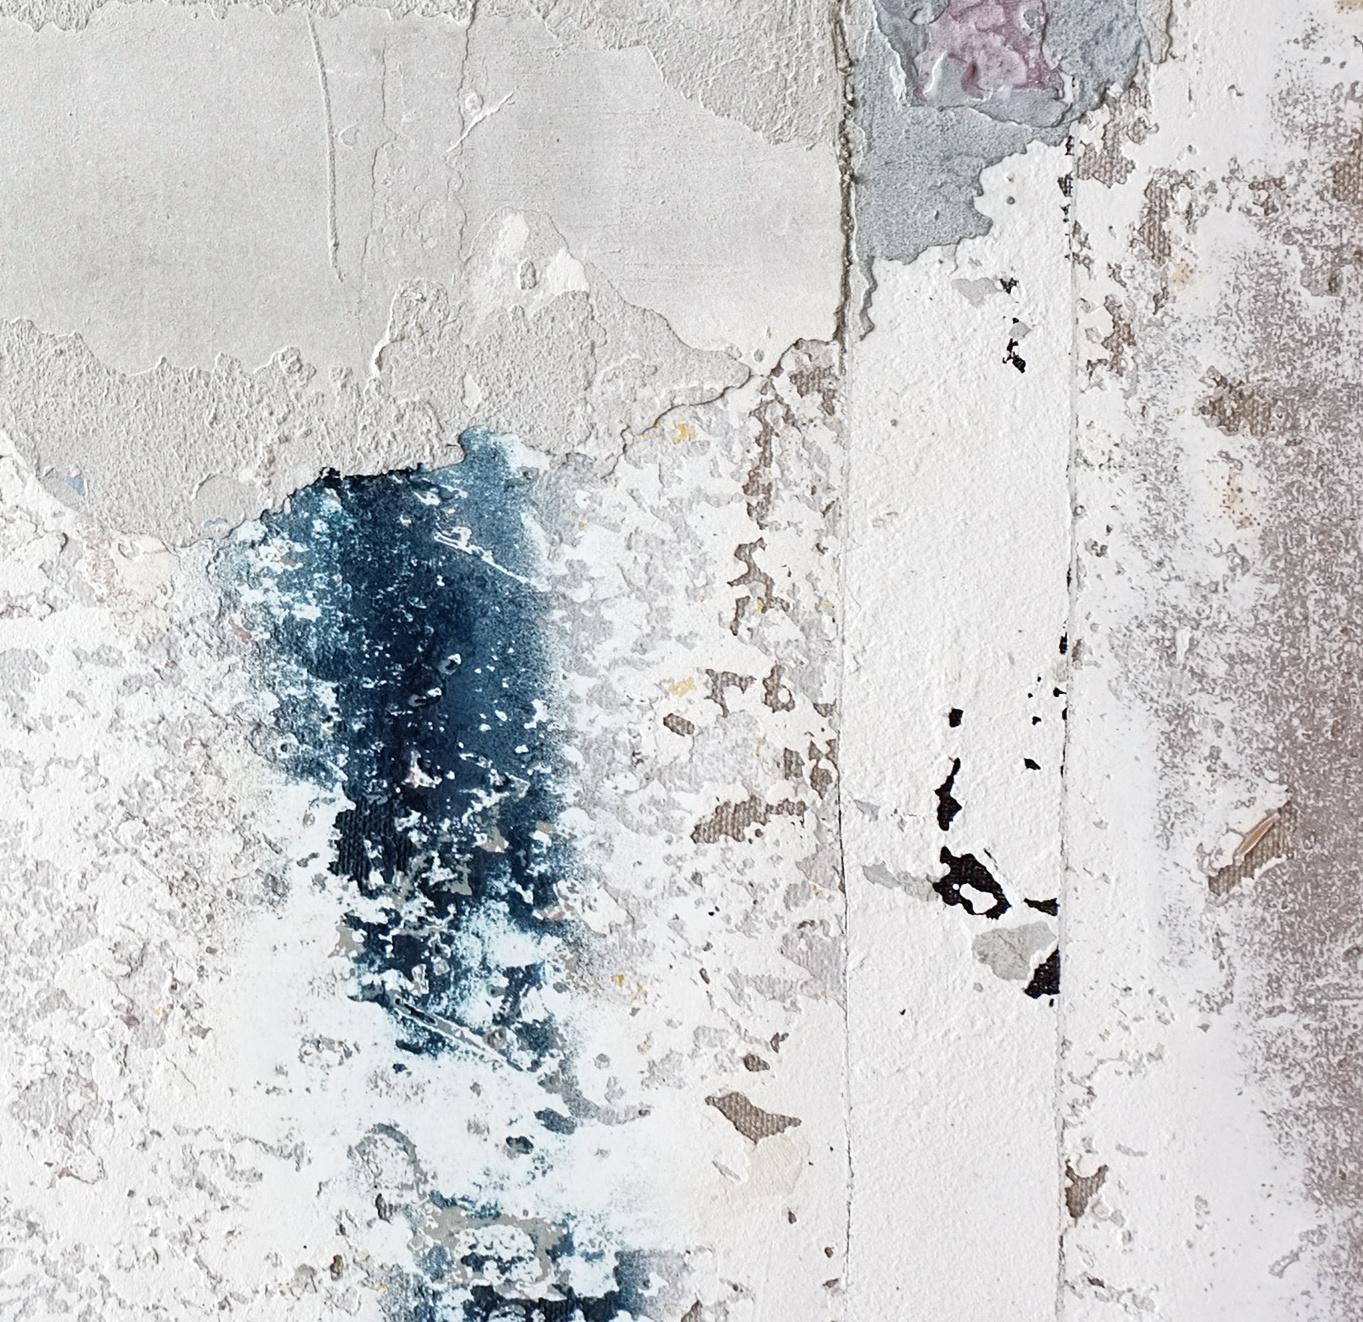 'Gums II' is an abstract minimalist mixed media painting by French artist - Antoine Puisais. It is a medium size blue and grey tone contemporary collage on linen canvas with a simple monochrome design and authentic, raw aesthetic. Its beautiful